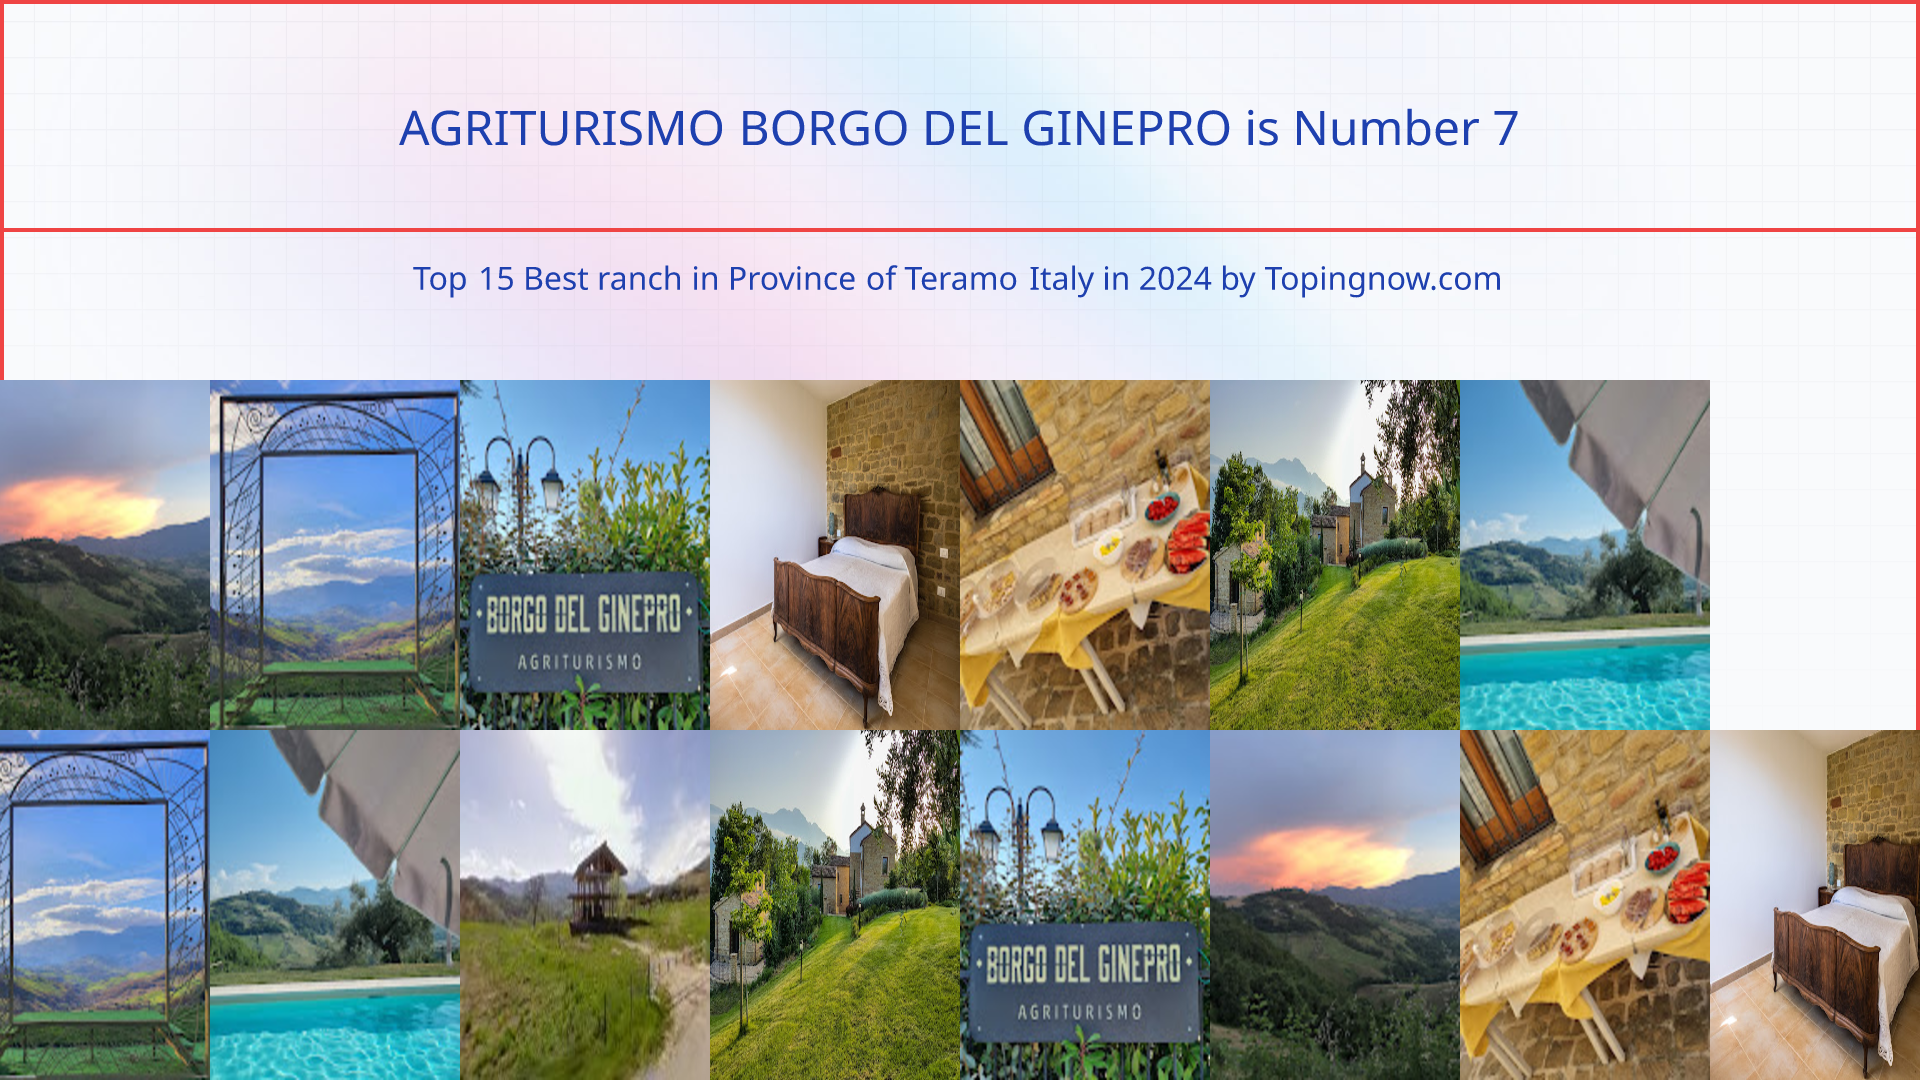 AGRITURISMO BORGO DEL GINEPRO: Top 15 Best ranch in Province of Teramo Italy in 2024